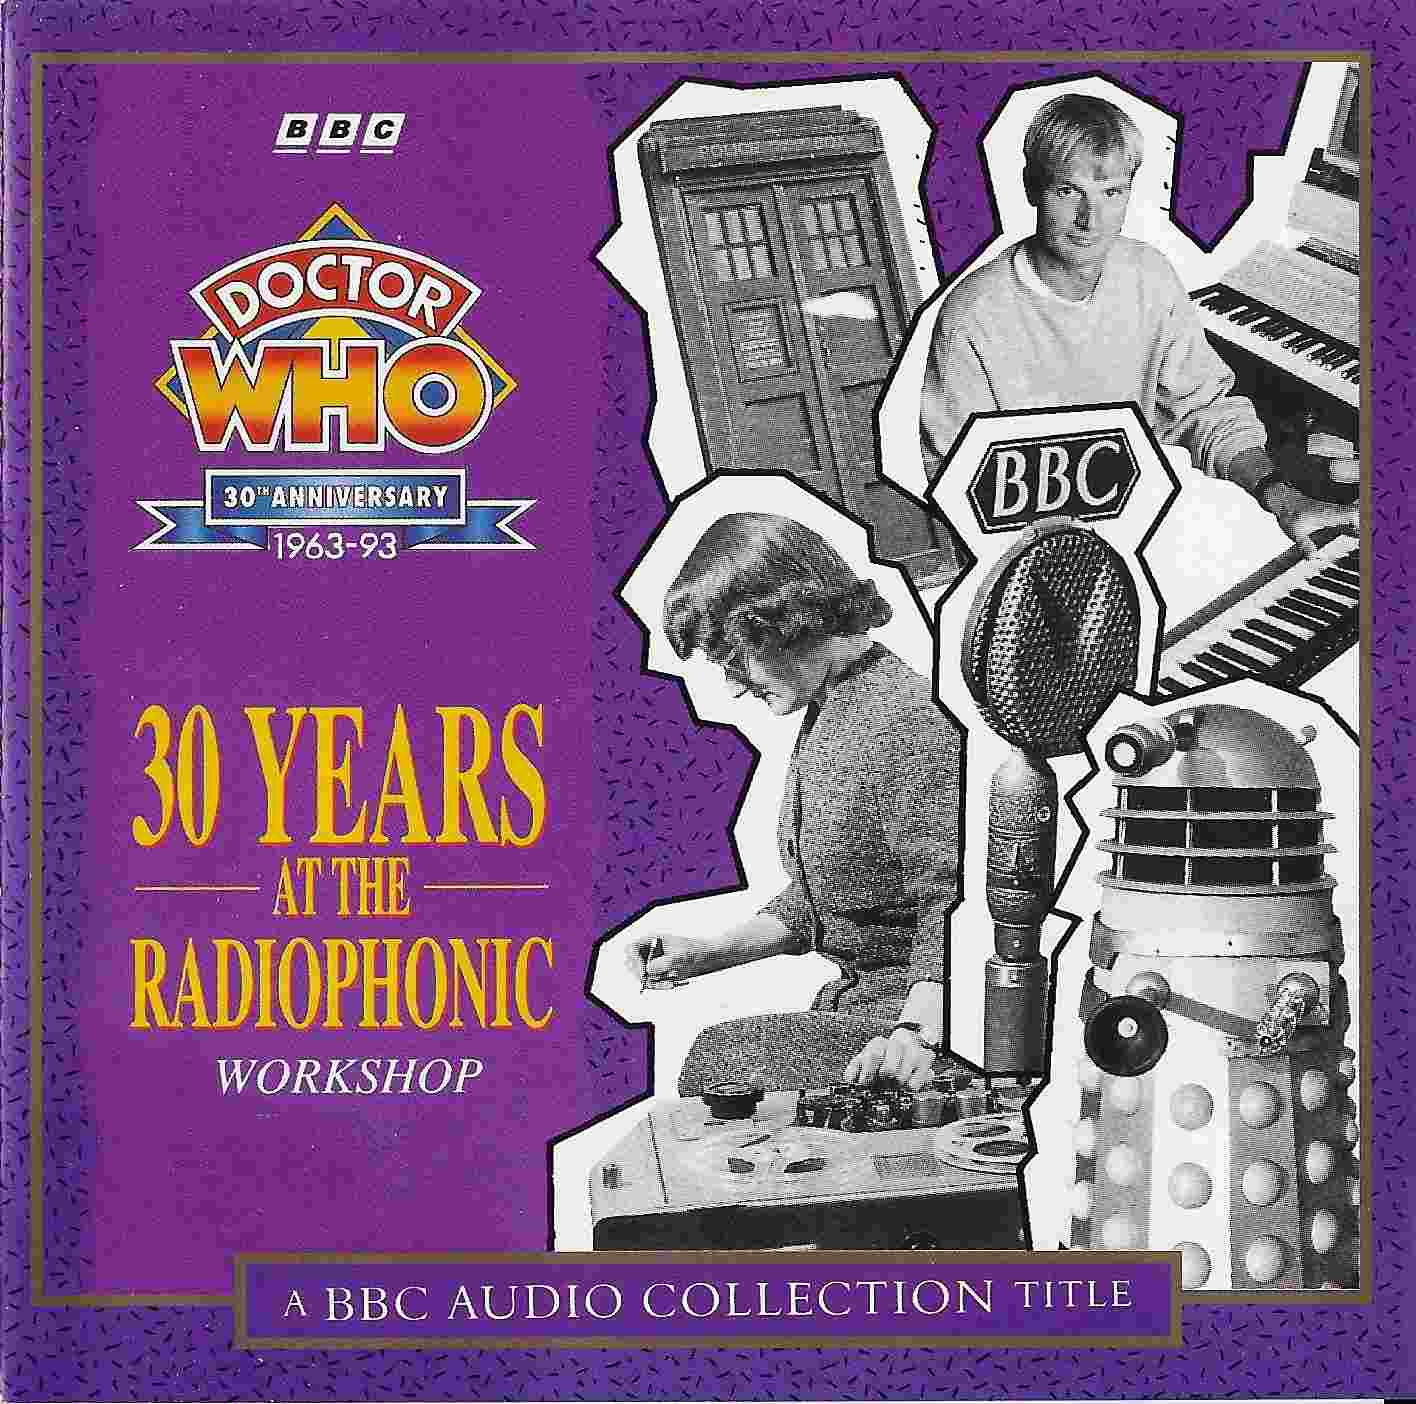 Picture of Doctor Who - 30 years at the BBC radiophonic workshop by artist Various from the BBC cds - Records and Tapes library